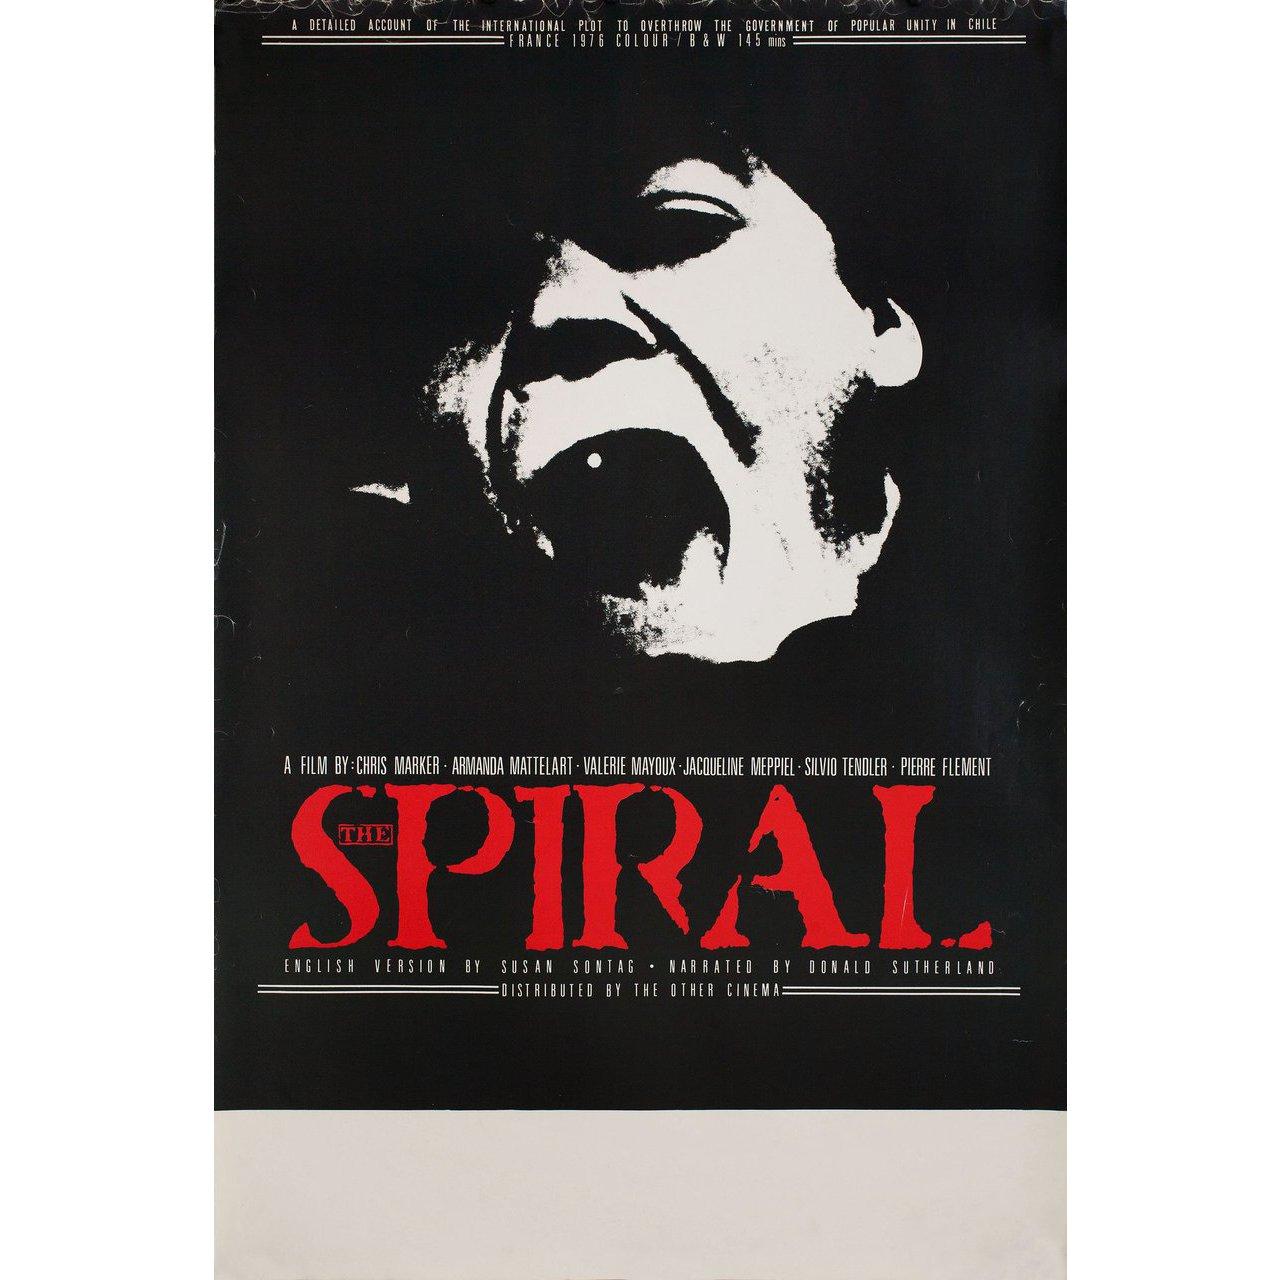 Original 1976 British double crown poster for the documentary film The Spiral (La Spirale) directed by Armand Mattelart / Valerie Mayoux / Jacqueline Meppiel with Med Hondo / Francois Perier / Donald Sutherland. Very good-fine condition, rolled.